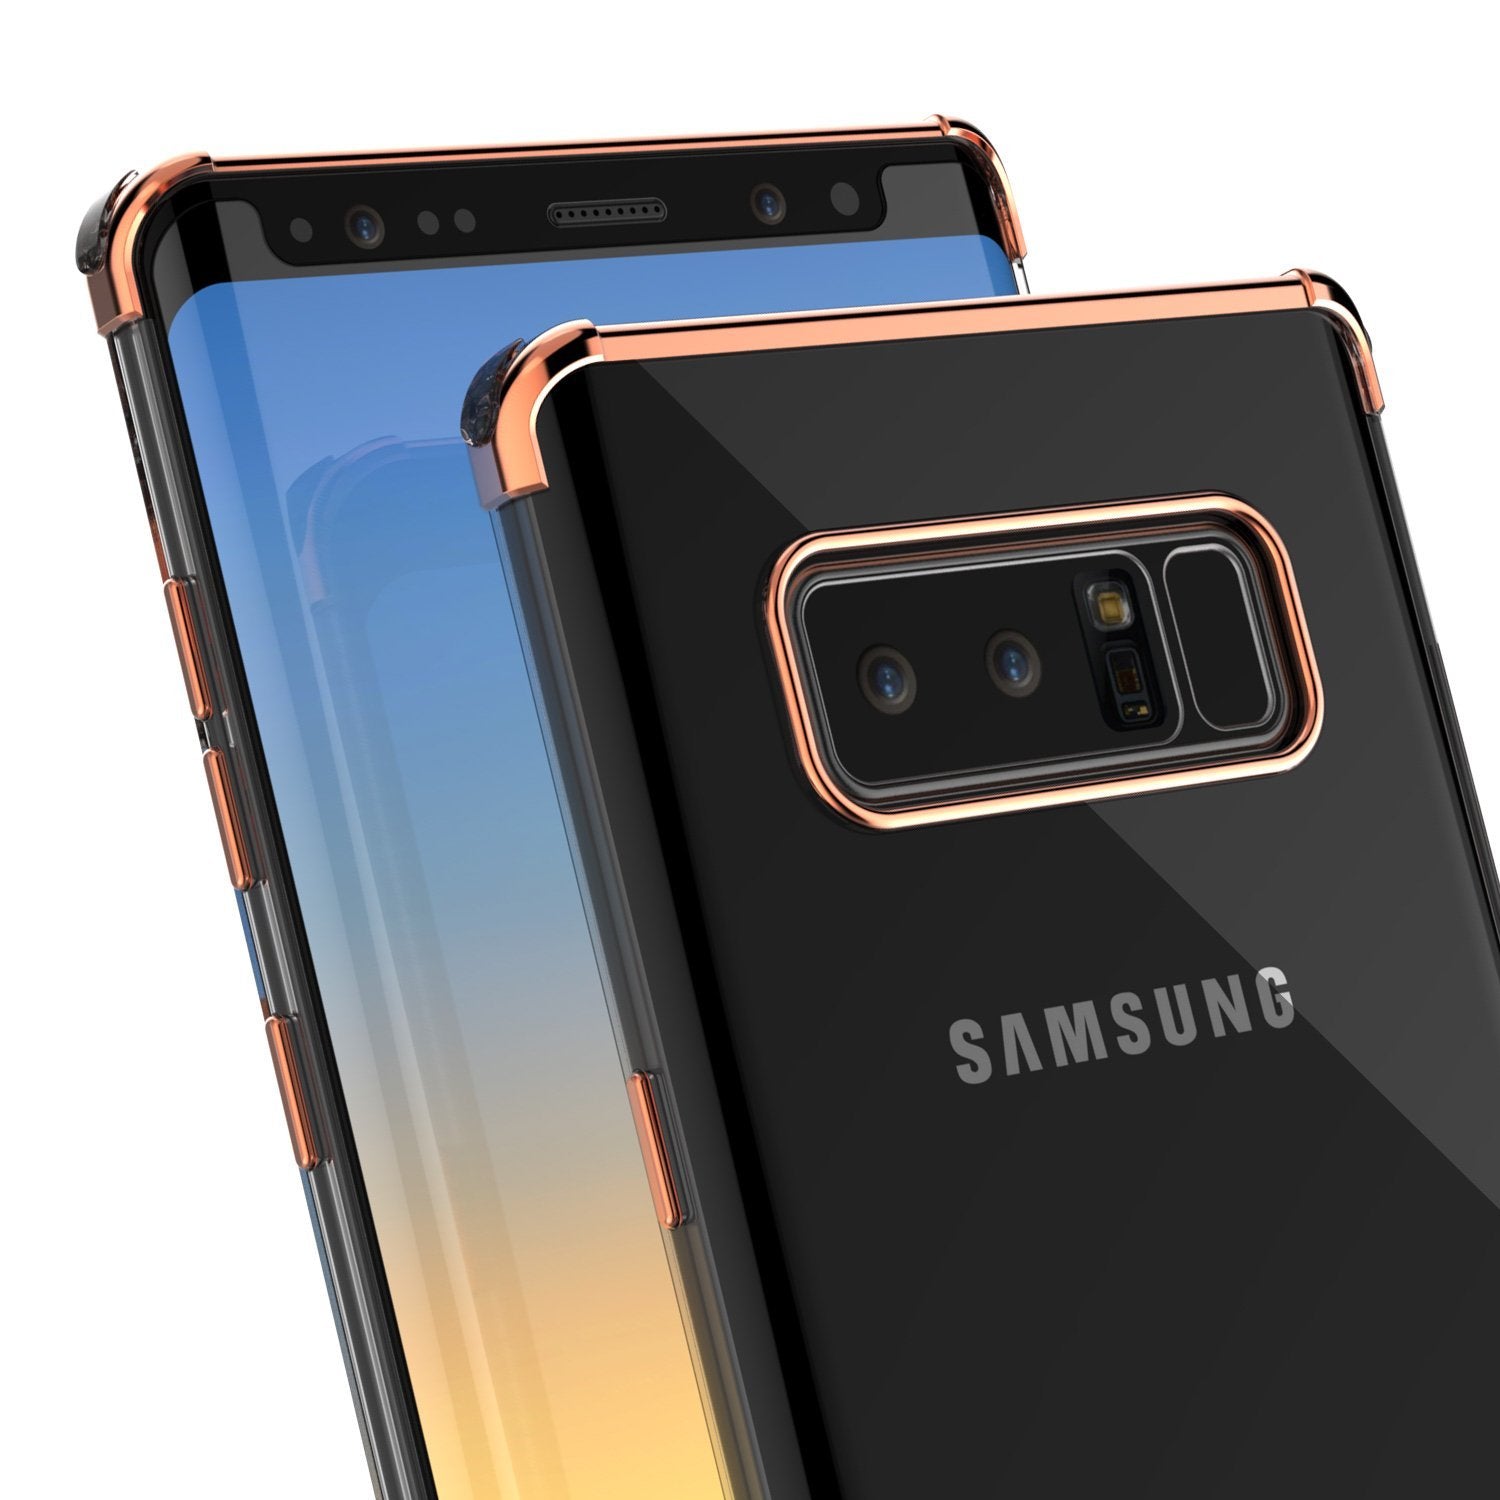 Galaxy Note 8 Punkcase Slim-Fit Case W/ Screen Protector [Rose Gold]